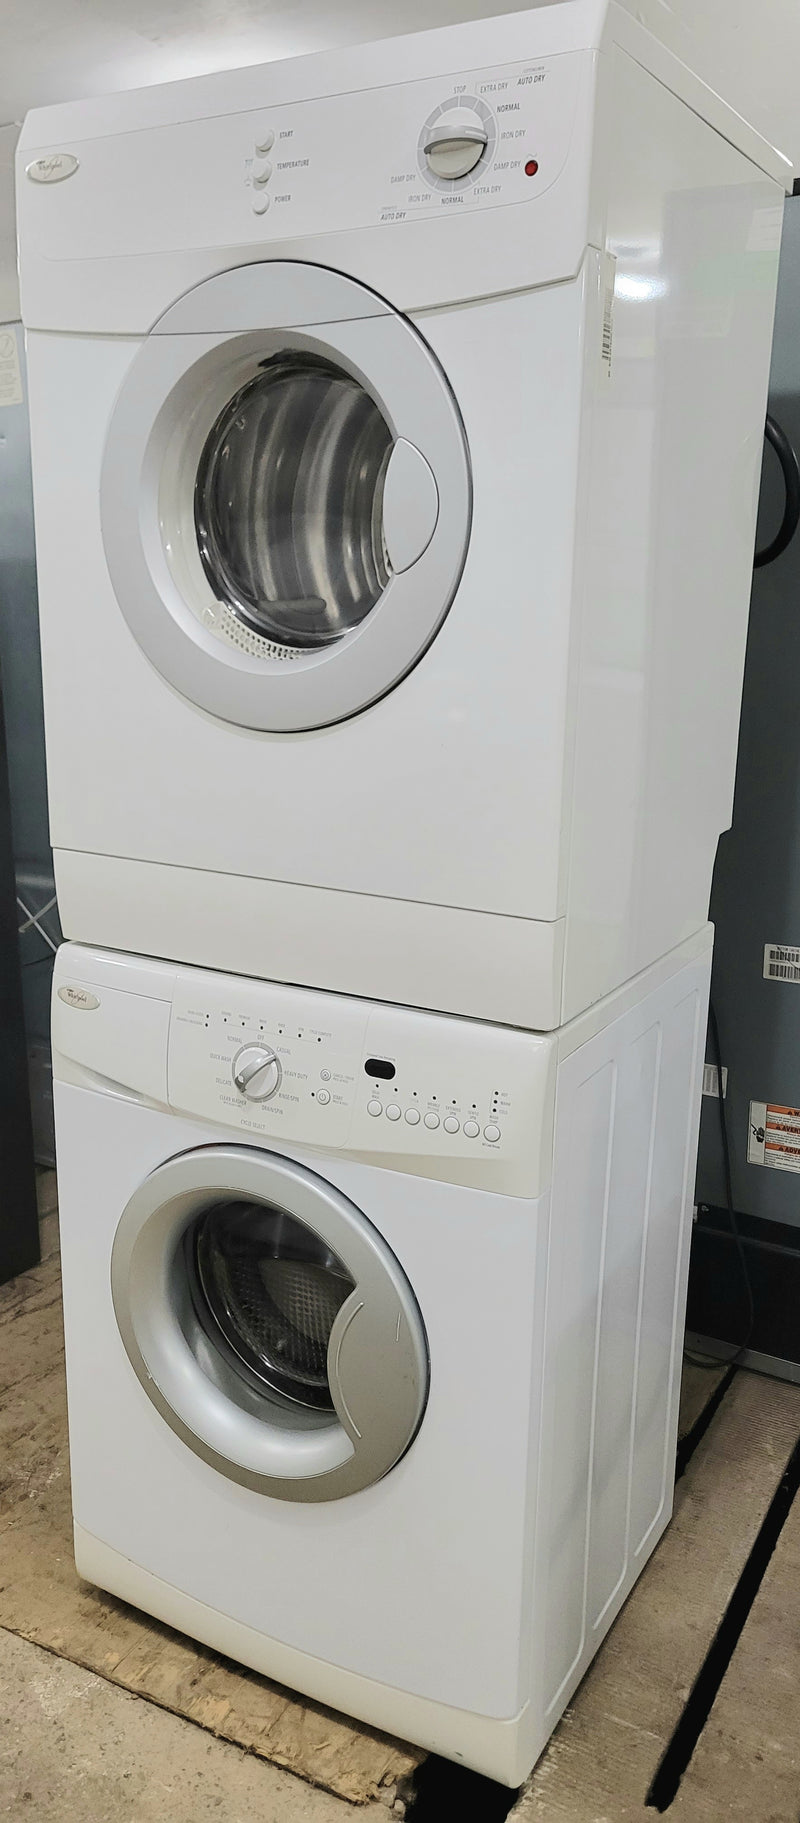 Whirlpool 24" Wide Apartment Size Matching Stackable Washer and Dryer Set, Free 60 Day Warranty